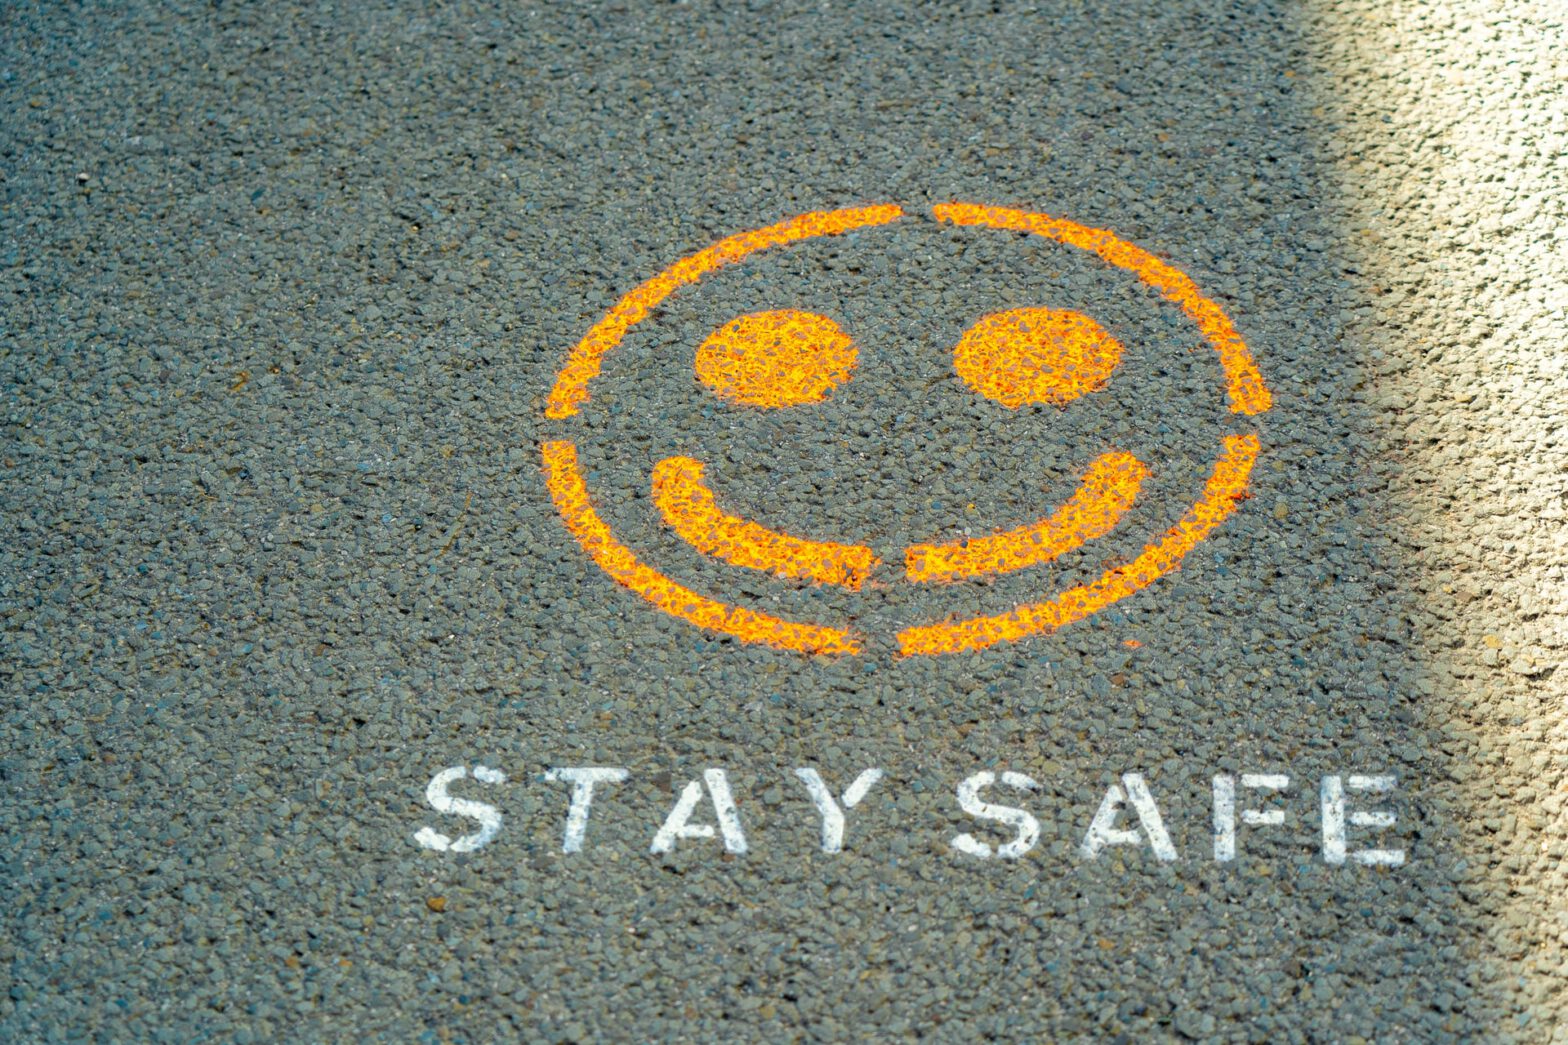 Stay safe Smiley